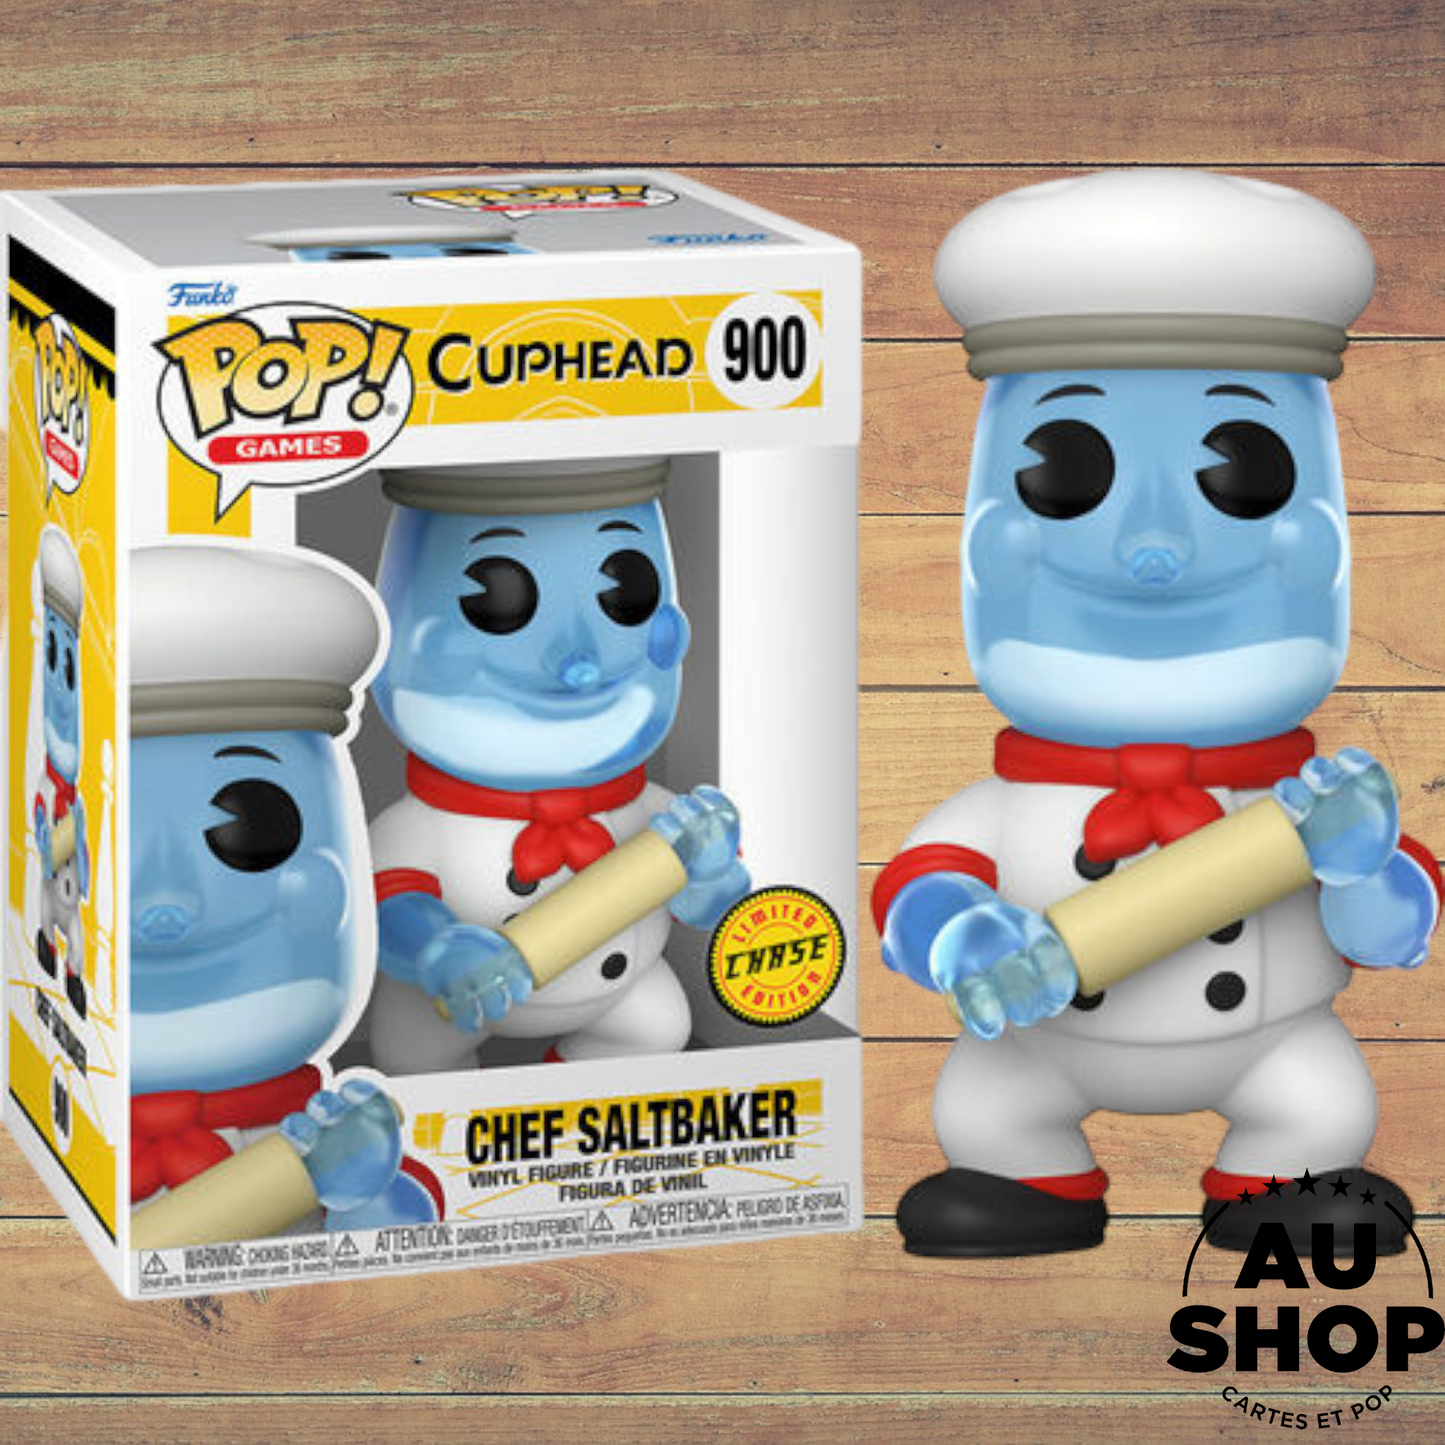 Chef Saltbaker 900 Cuphead Chase